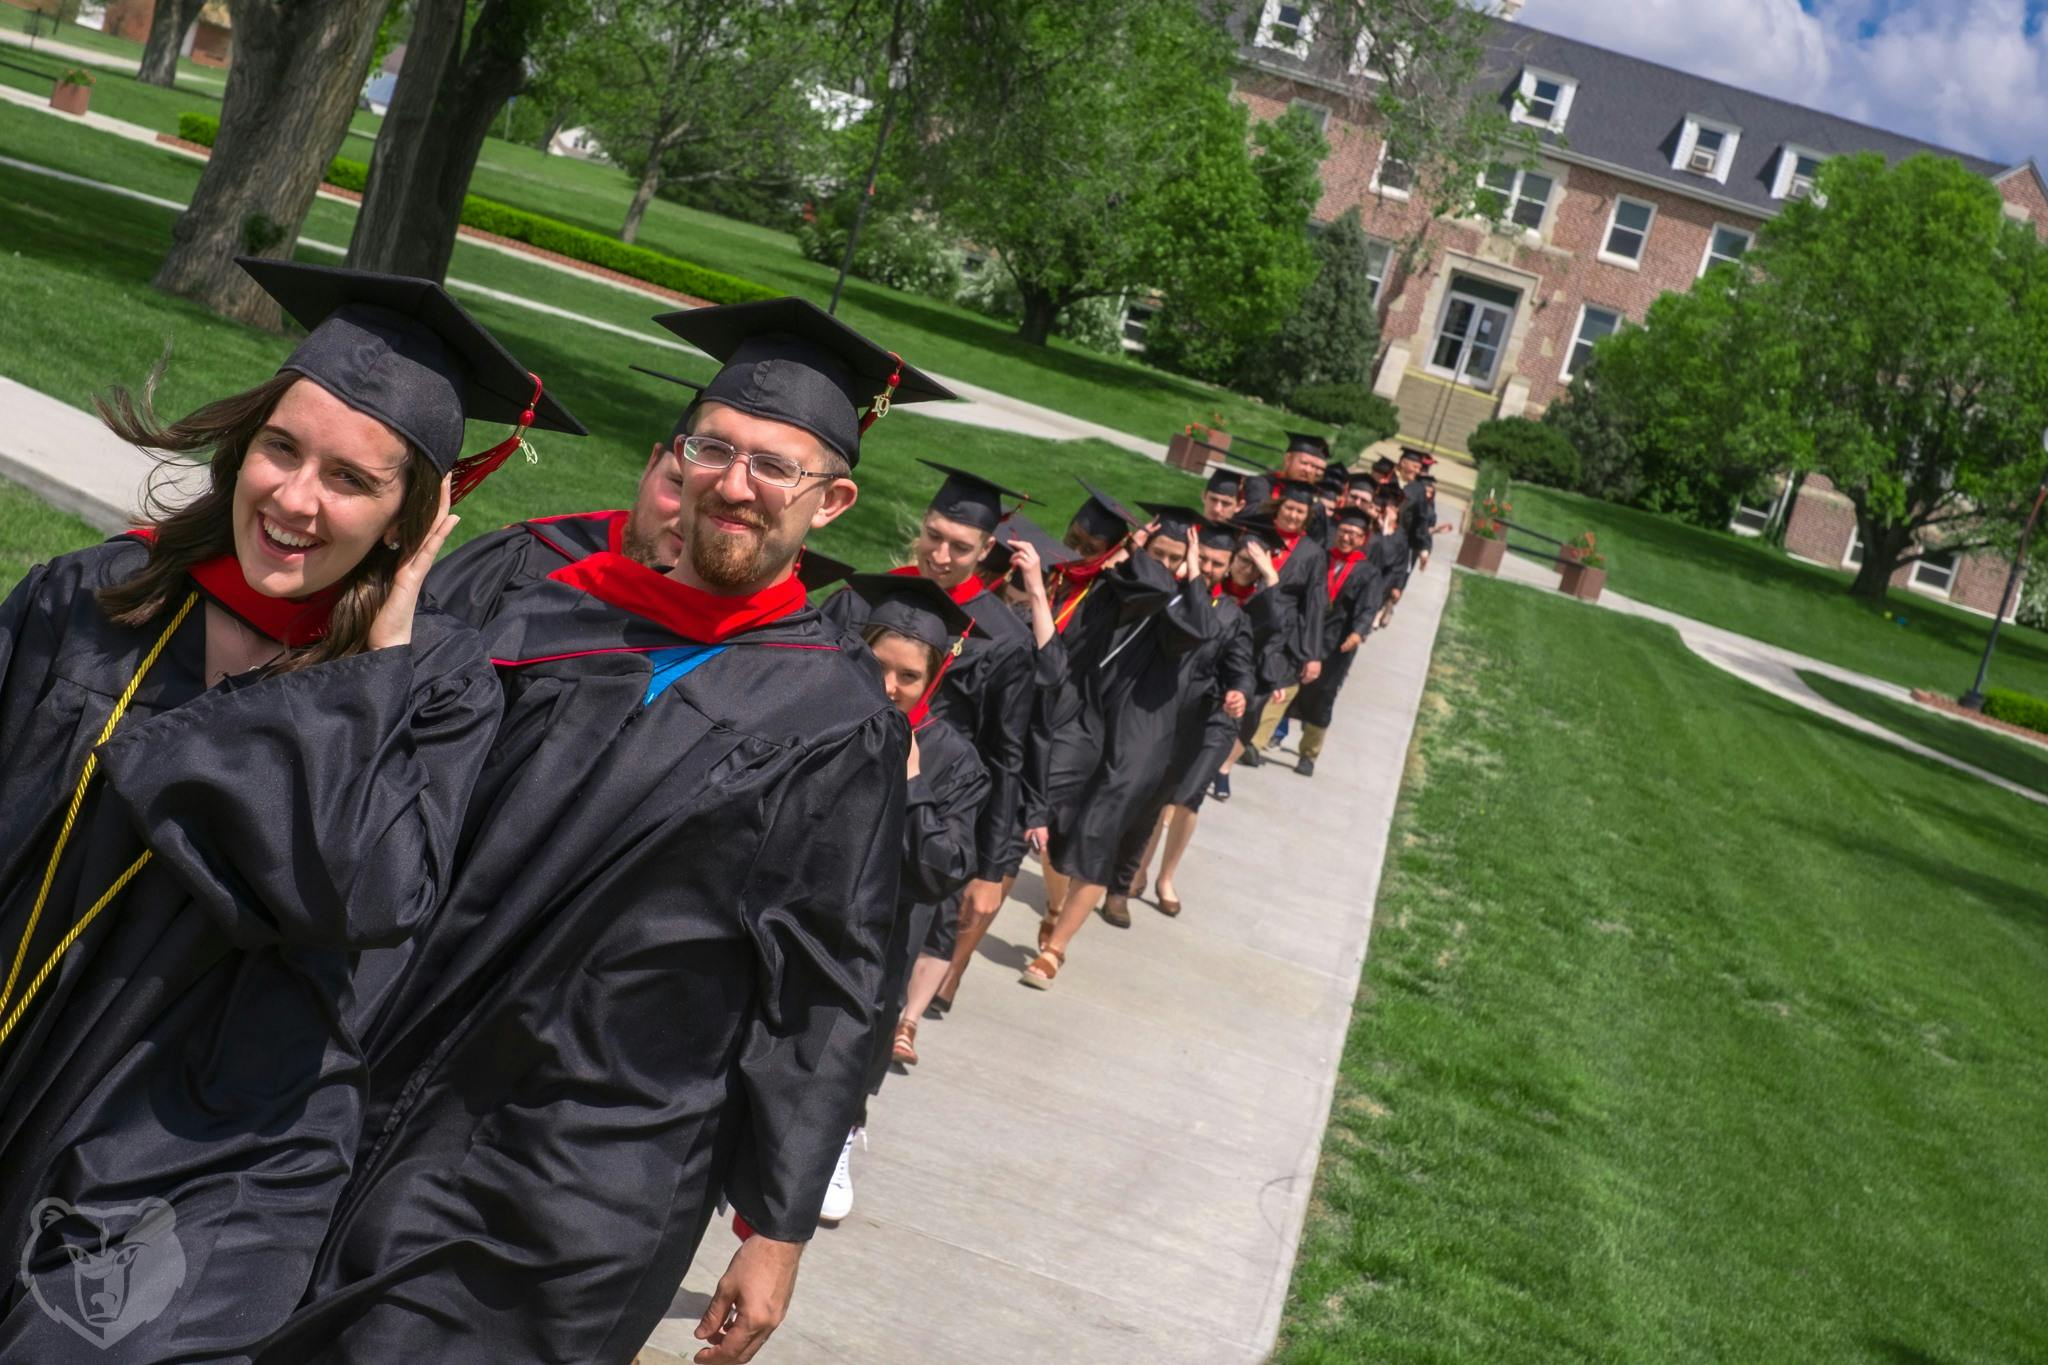 Students walking in a procession line wearing graduation caps and gowns at Barclay College.